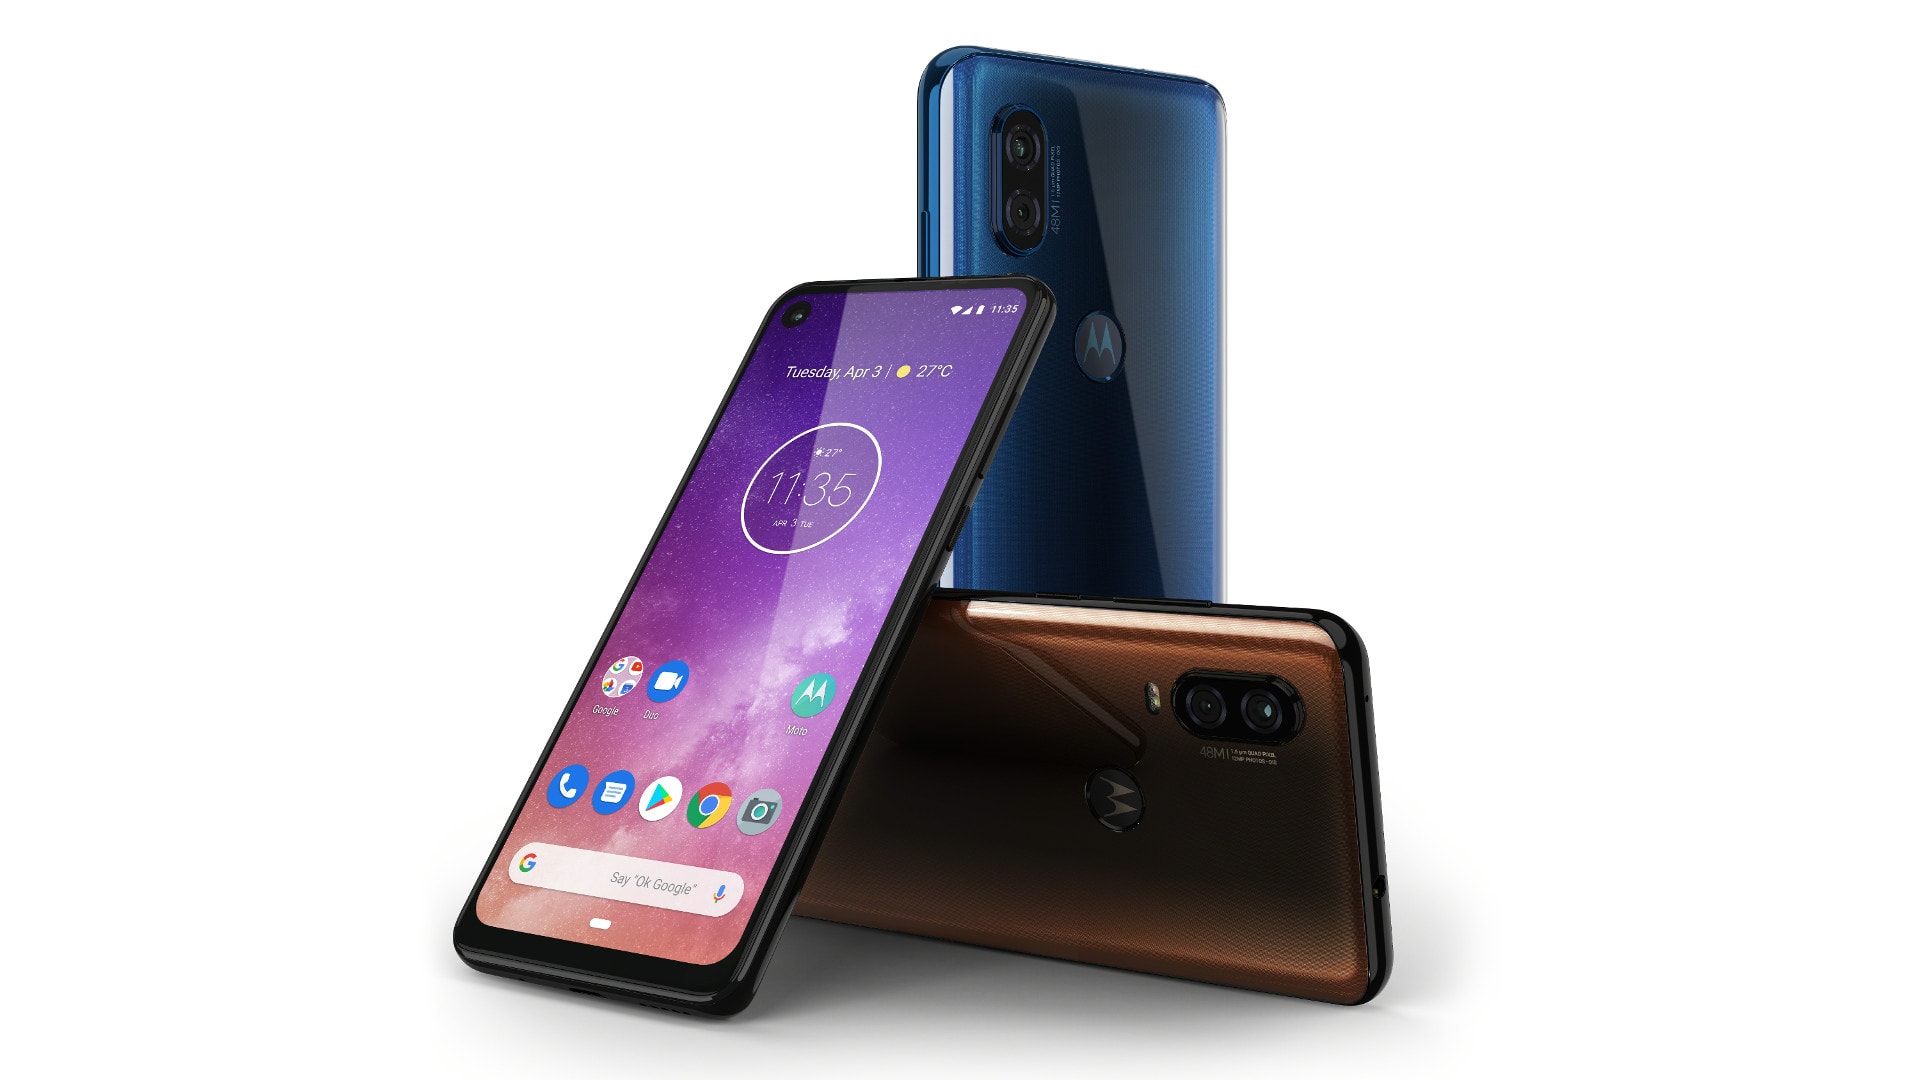 The Motorola One Vision devices.